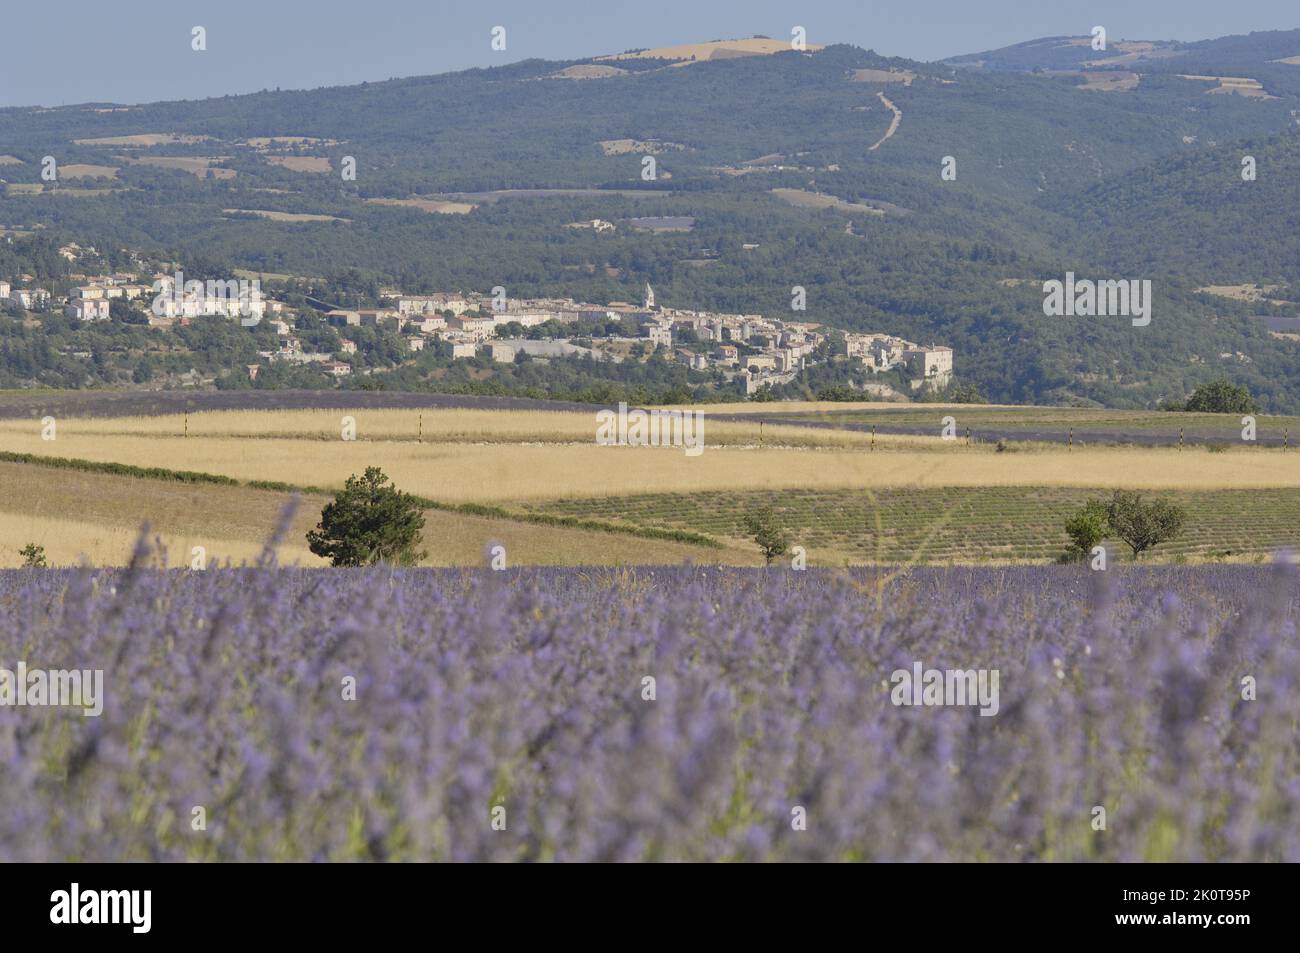 Lavender (Lavandula sp)  field of flowers to be harvested with the city of Sault in the background - Sault area - Provence - Vaucluse - France Stock Photo